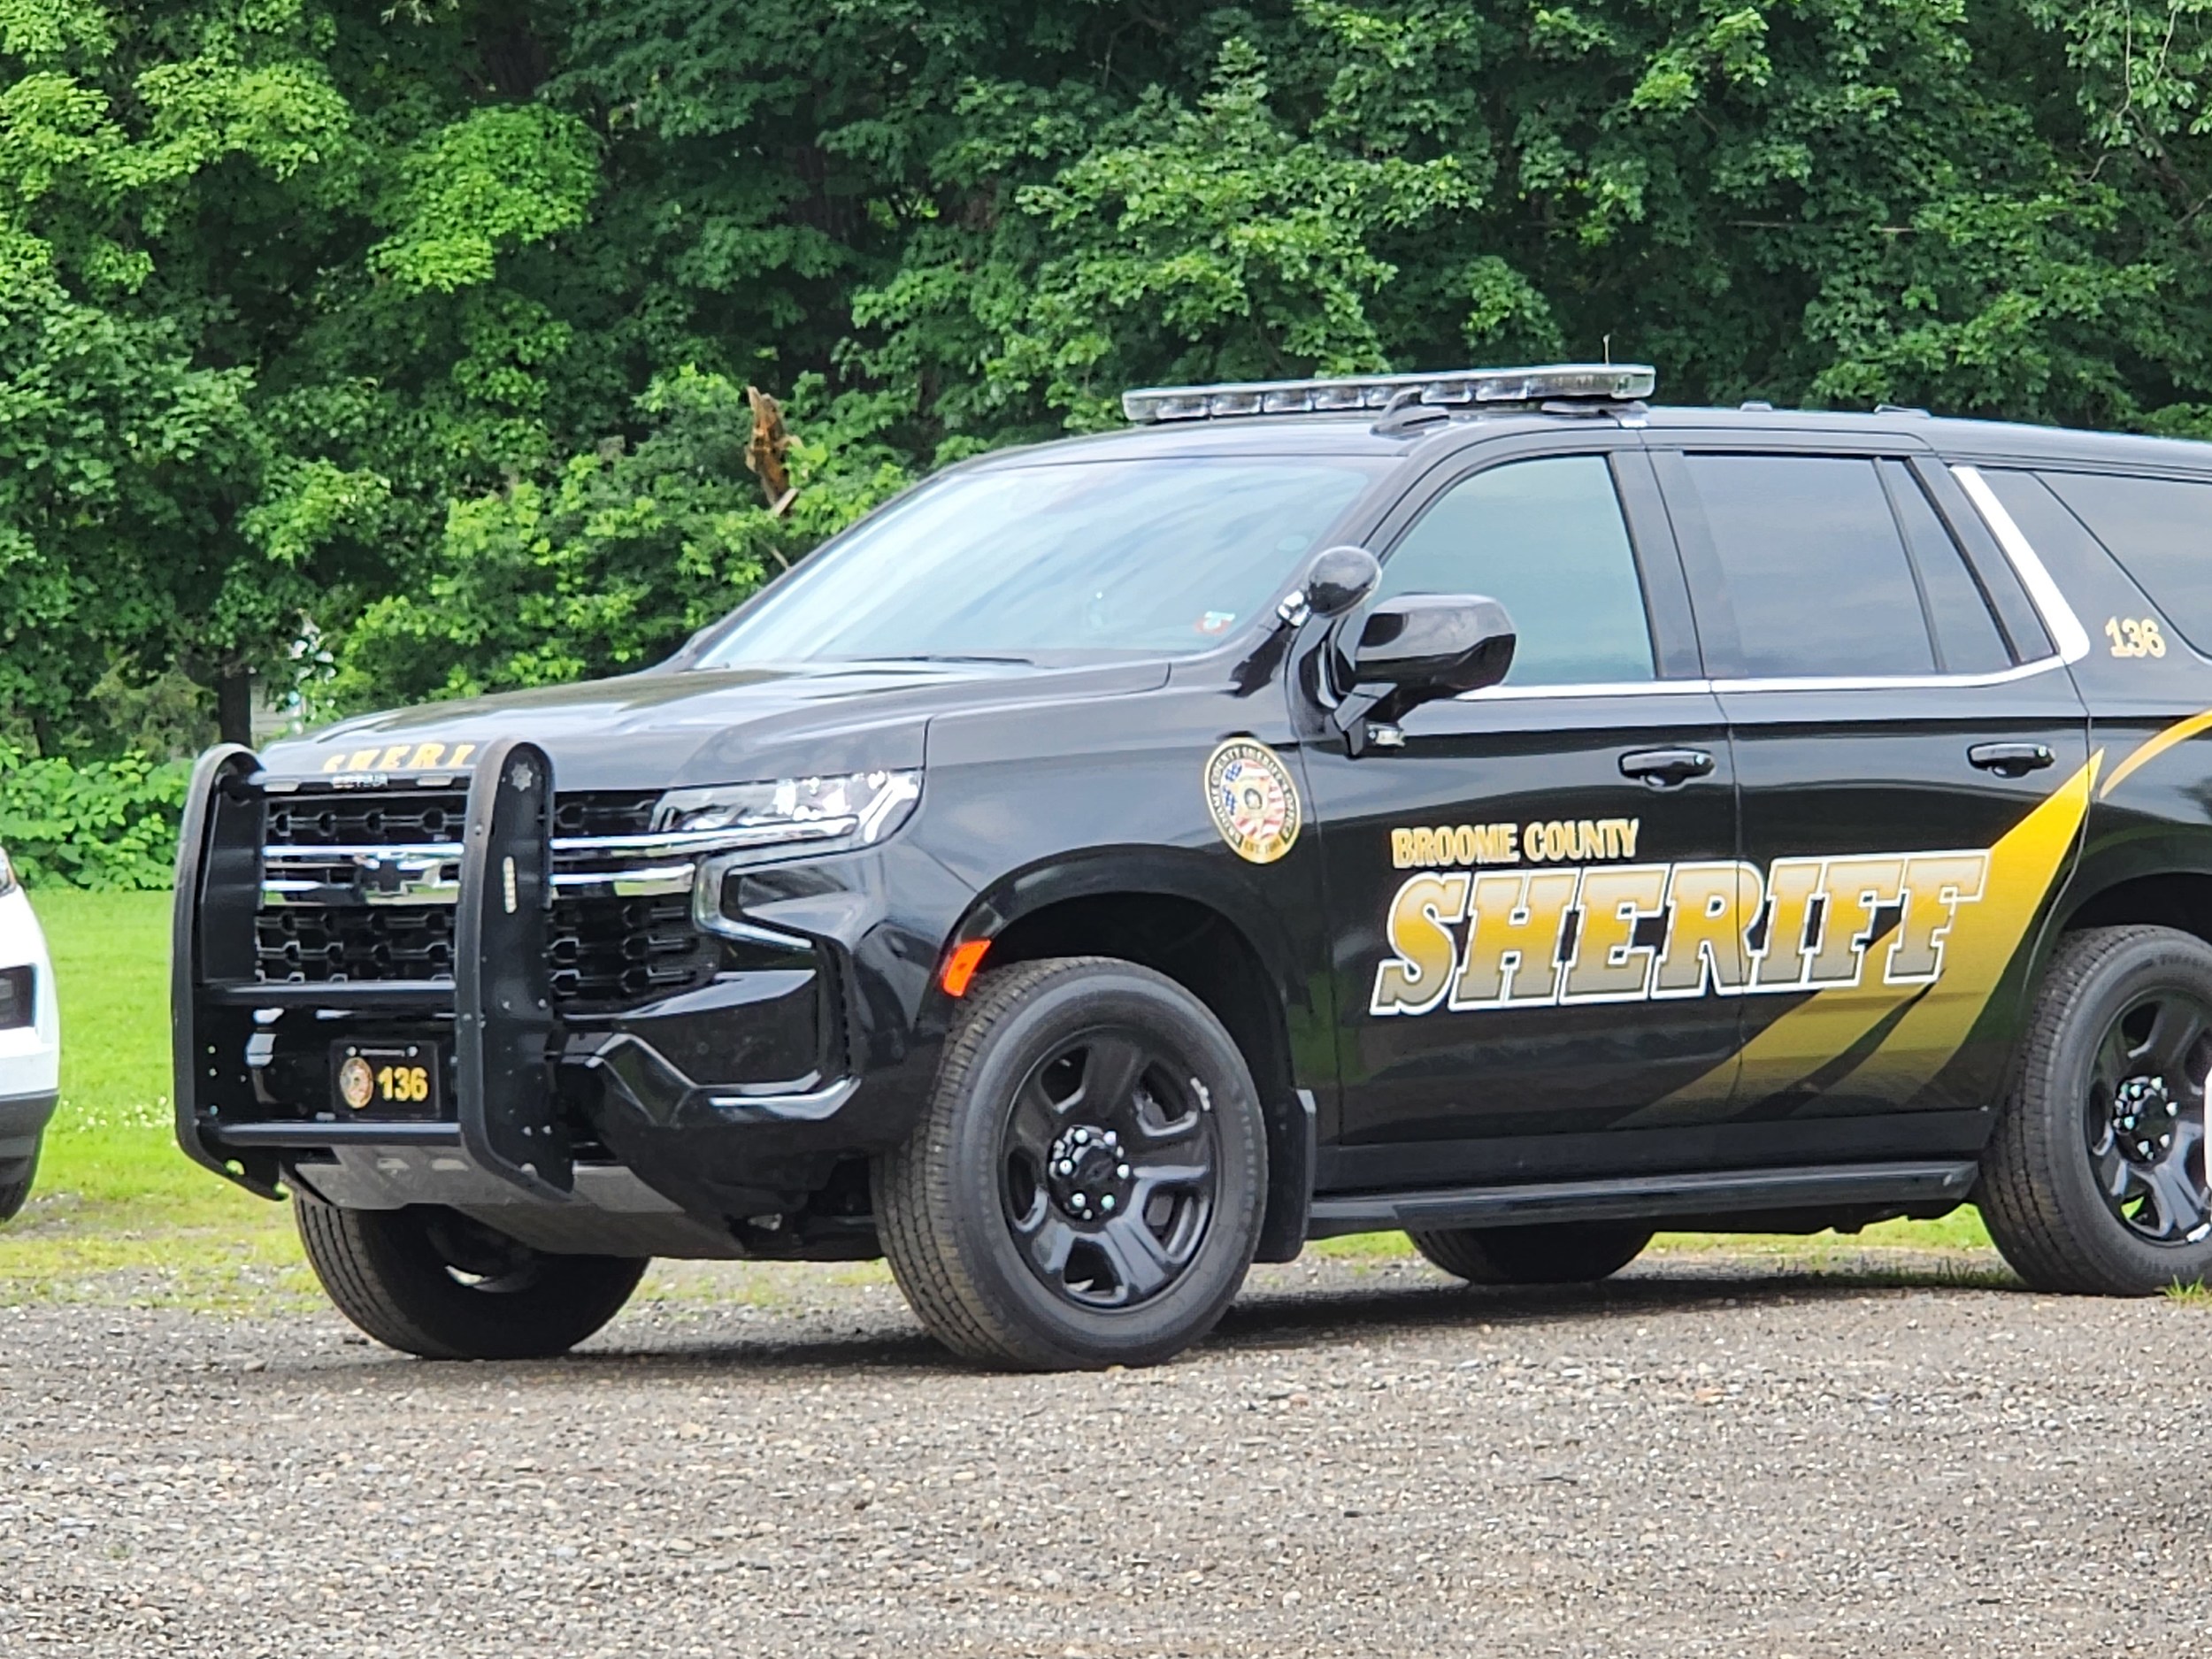 New Broome County Sheriff Patrol Vehicles Will Sport a New Look